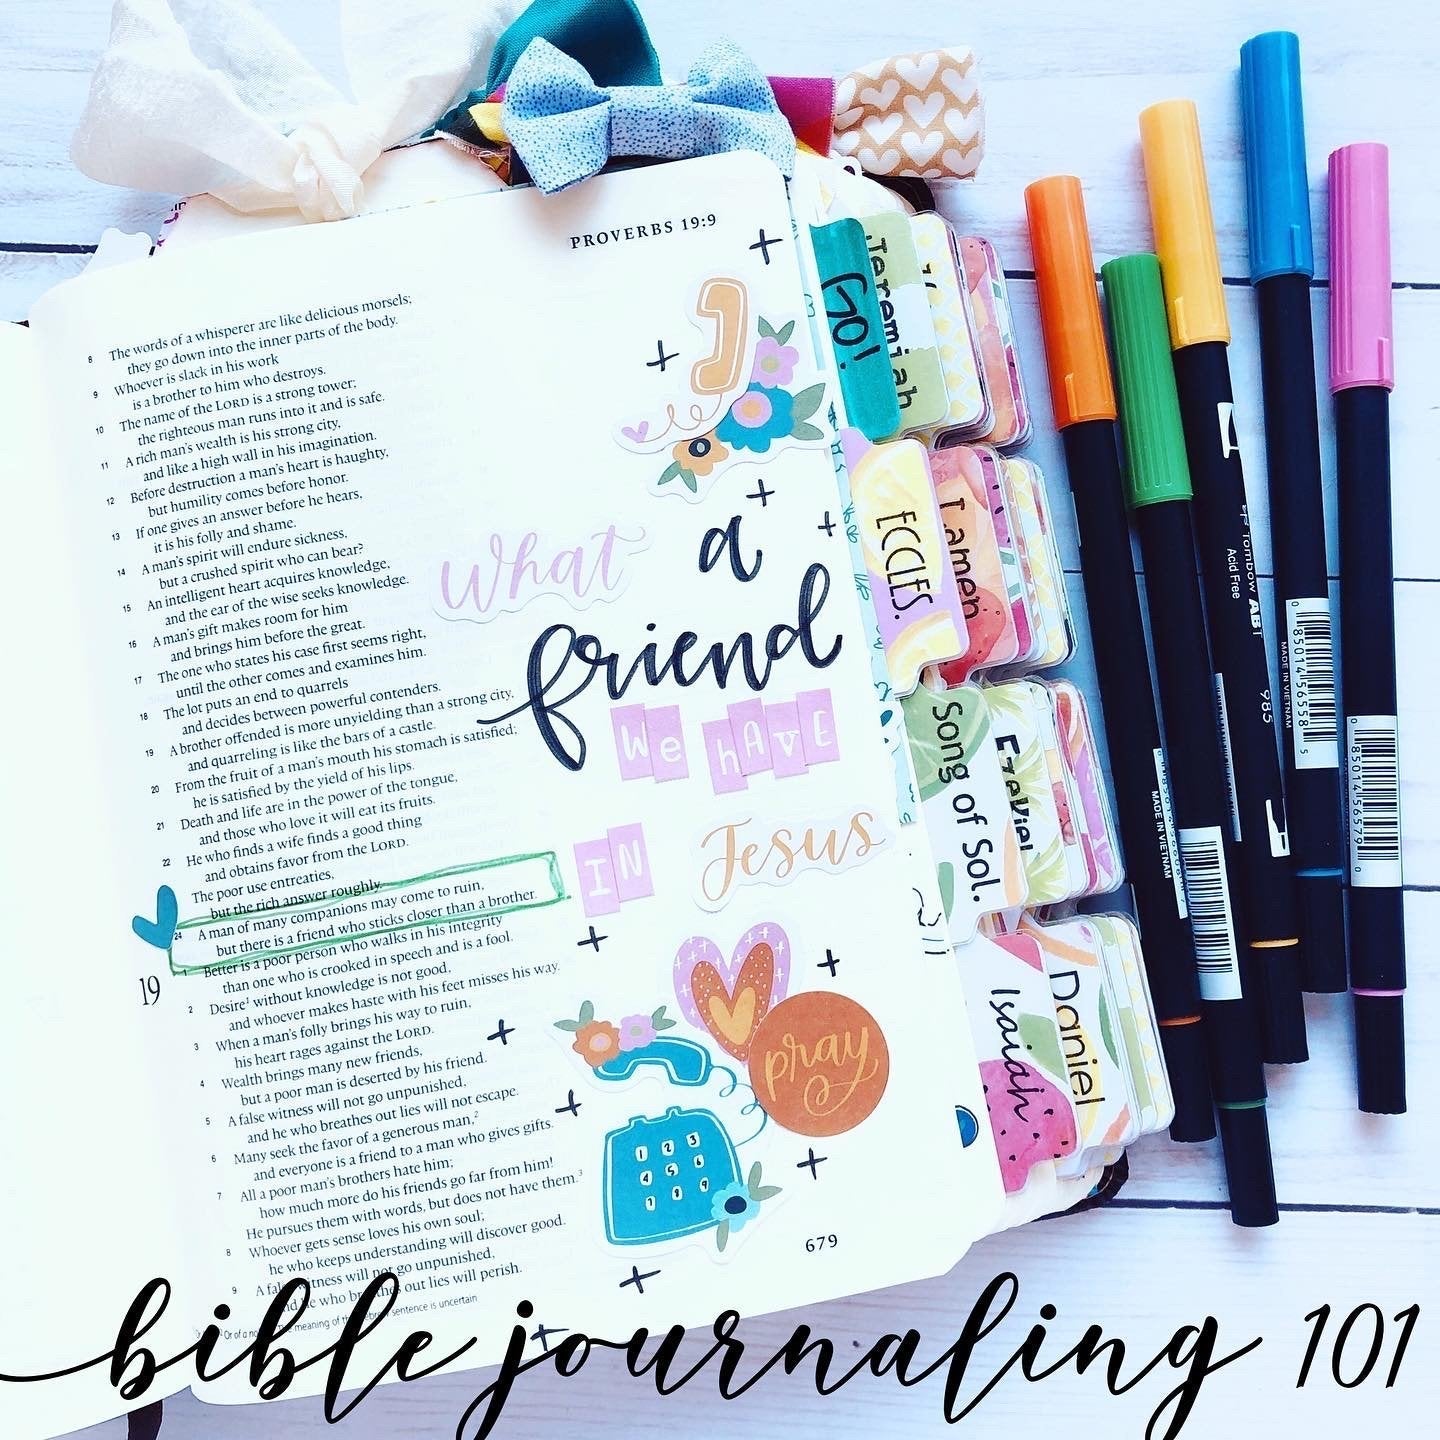 Bible Journaling 101: Sunday, October 8th, 2-3:30pm with Legacy of Love Creations